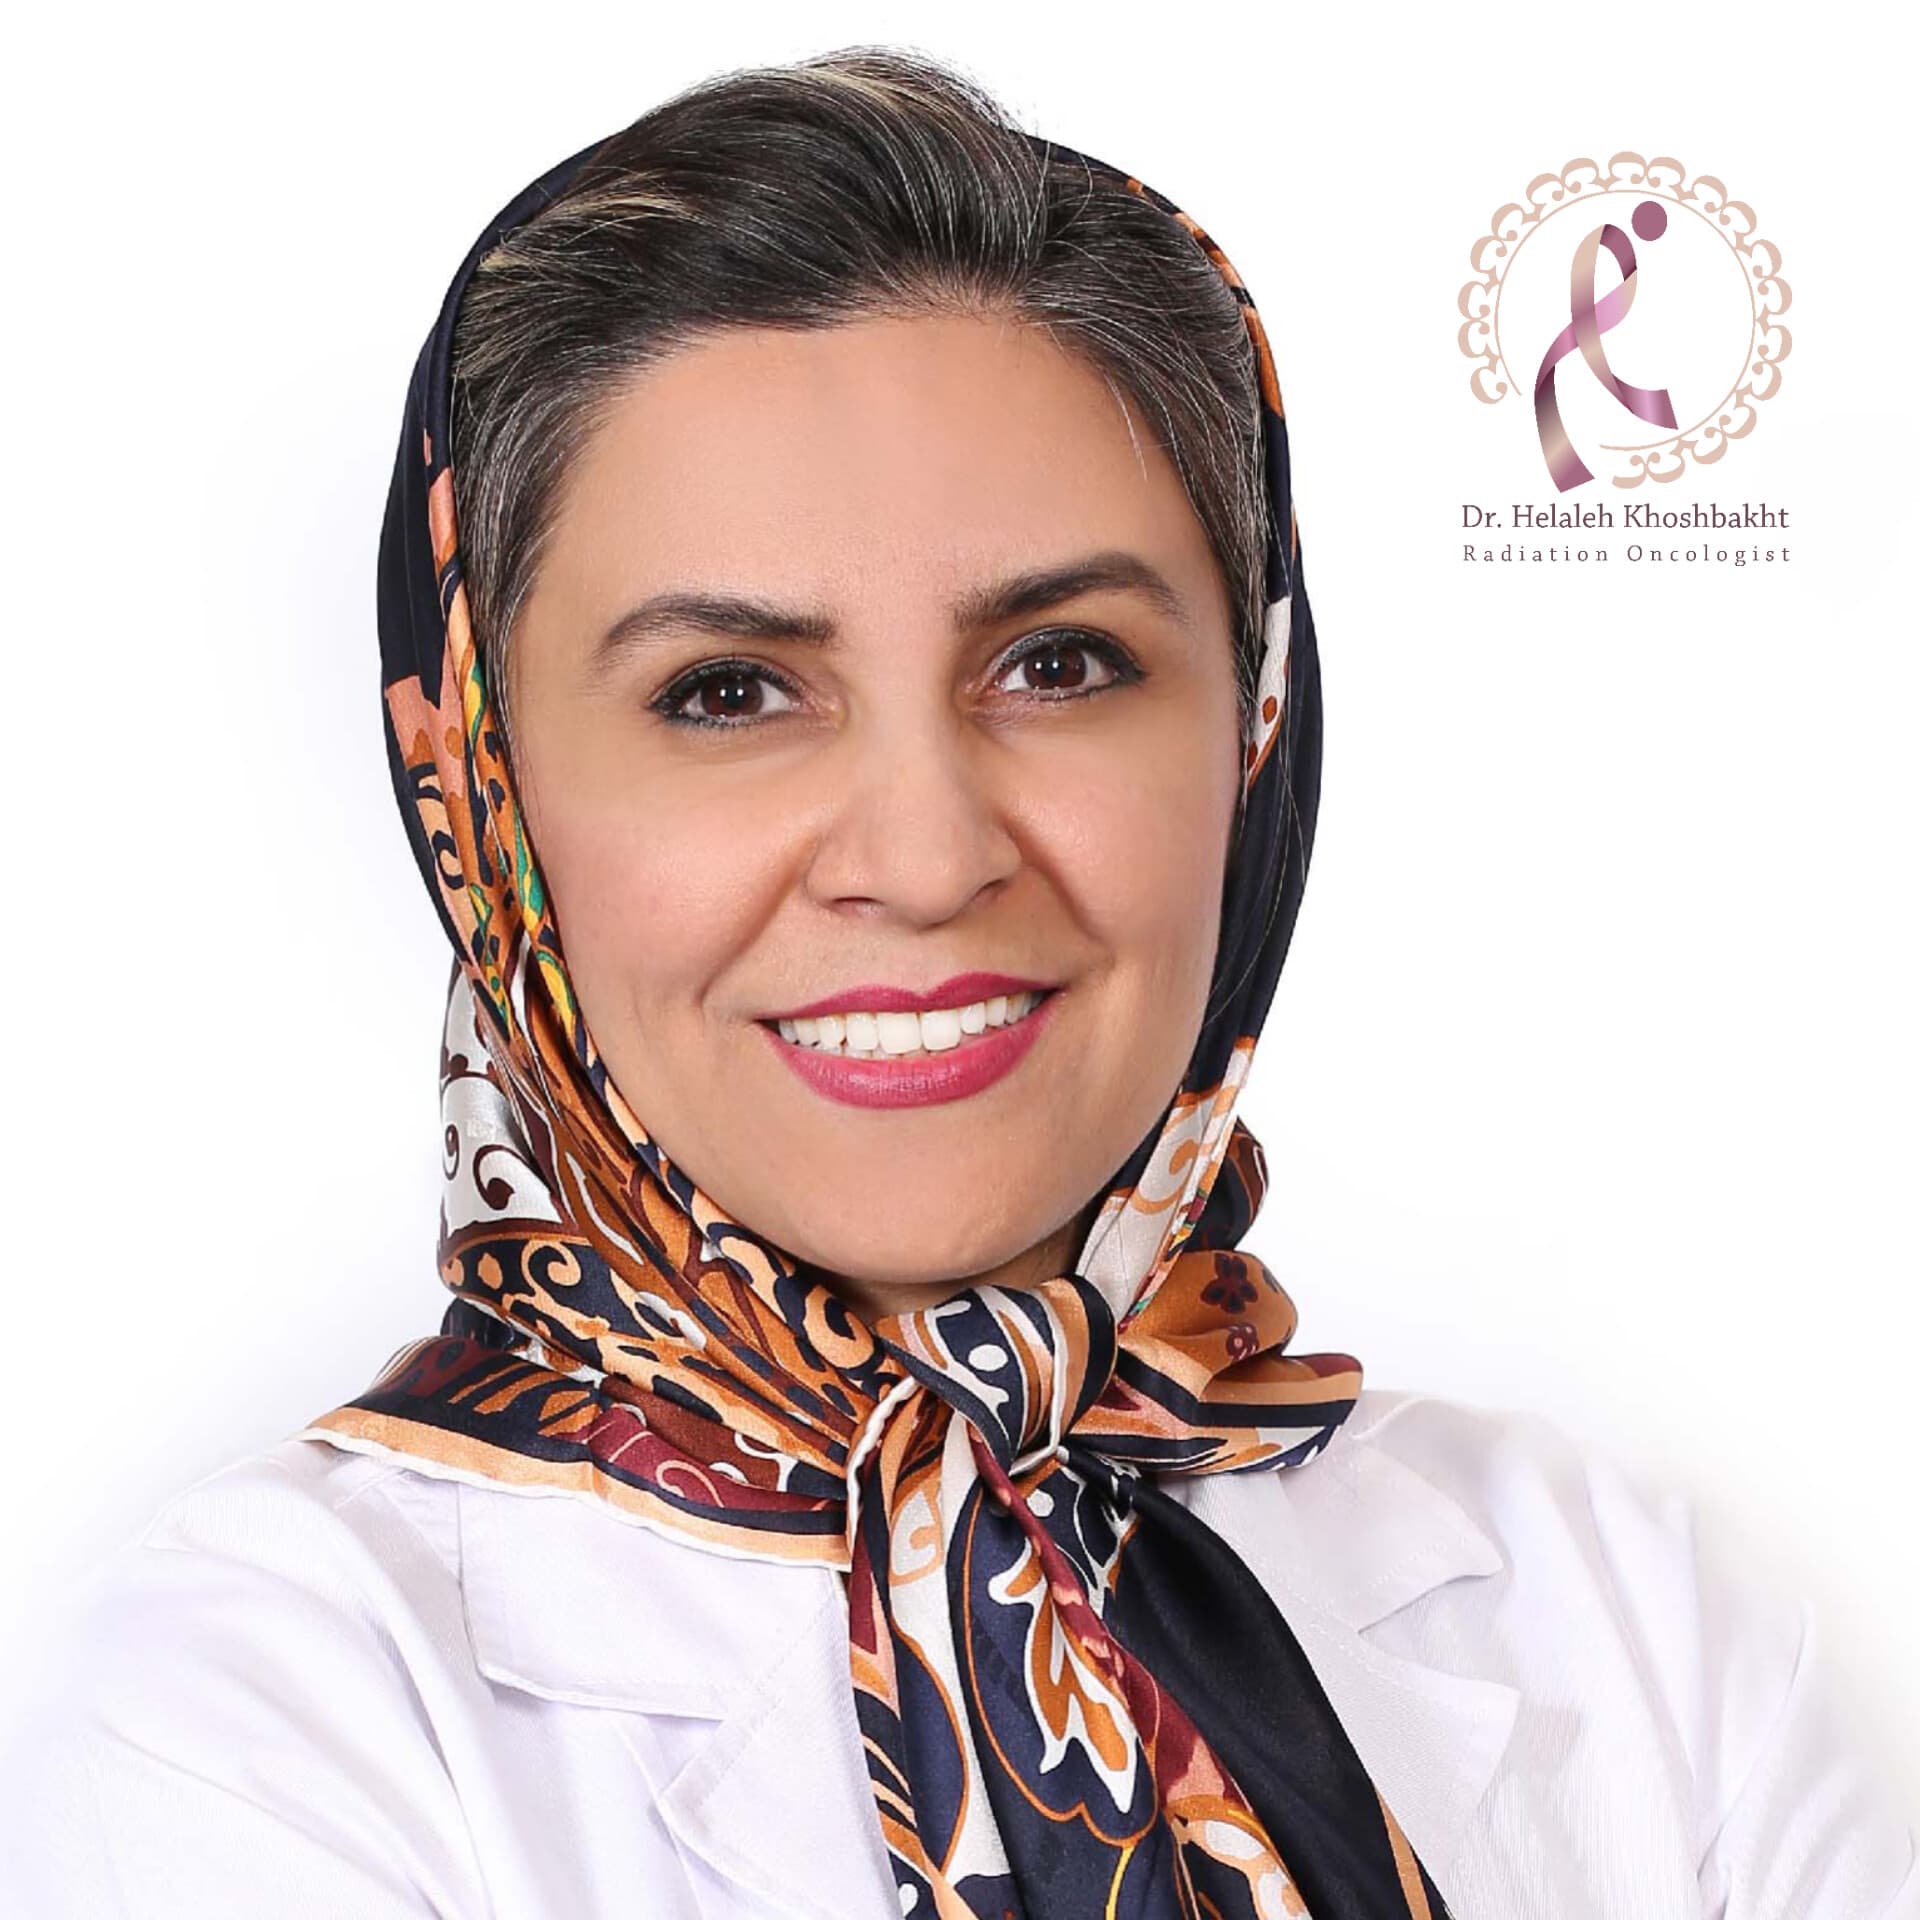 The Best Radiation Therapy Specialist in Tehran Ensuring Optimal Cancer Treatment